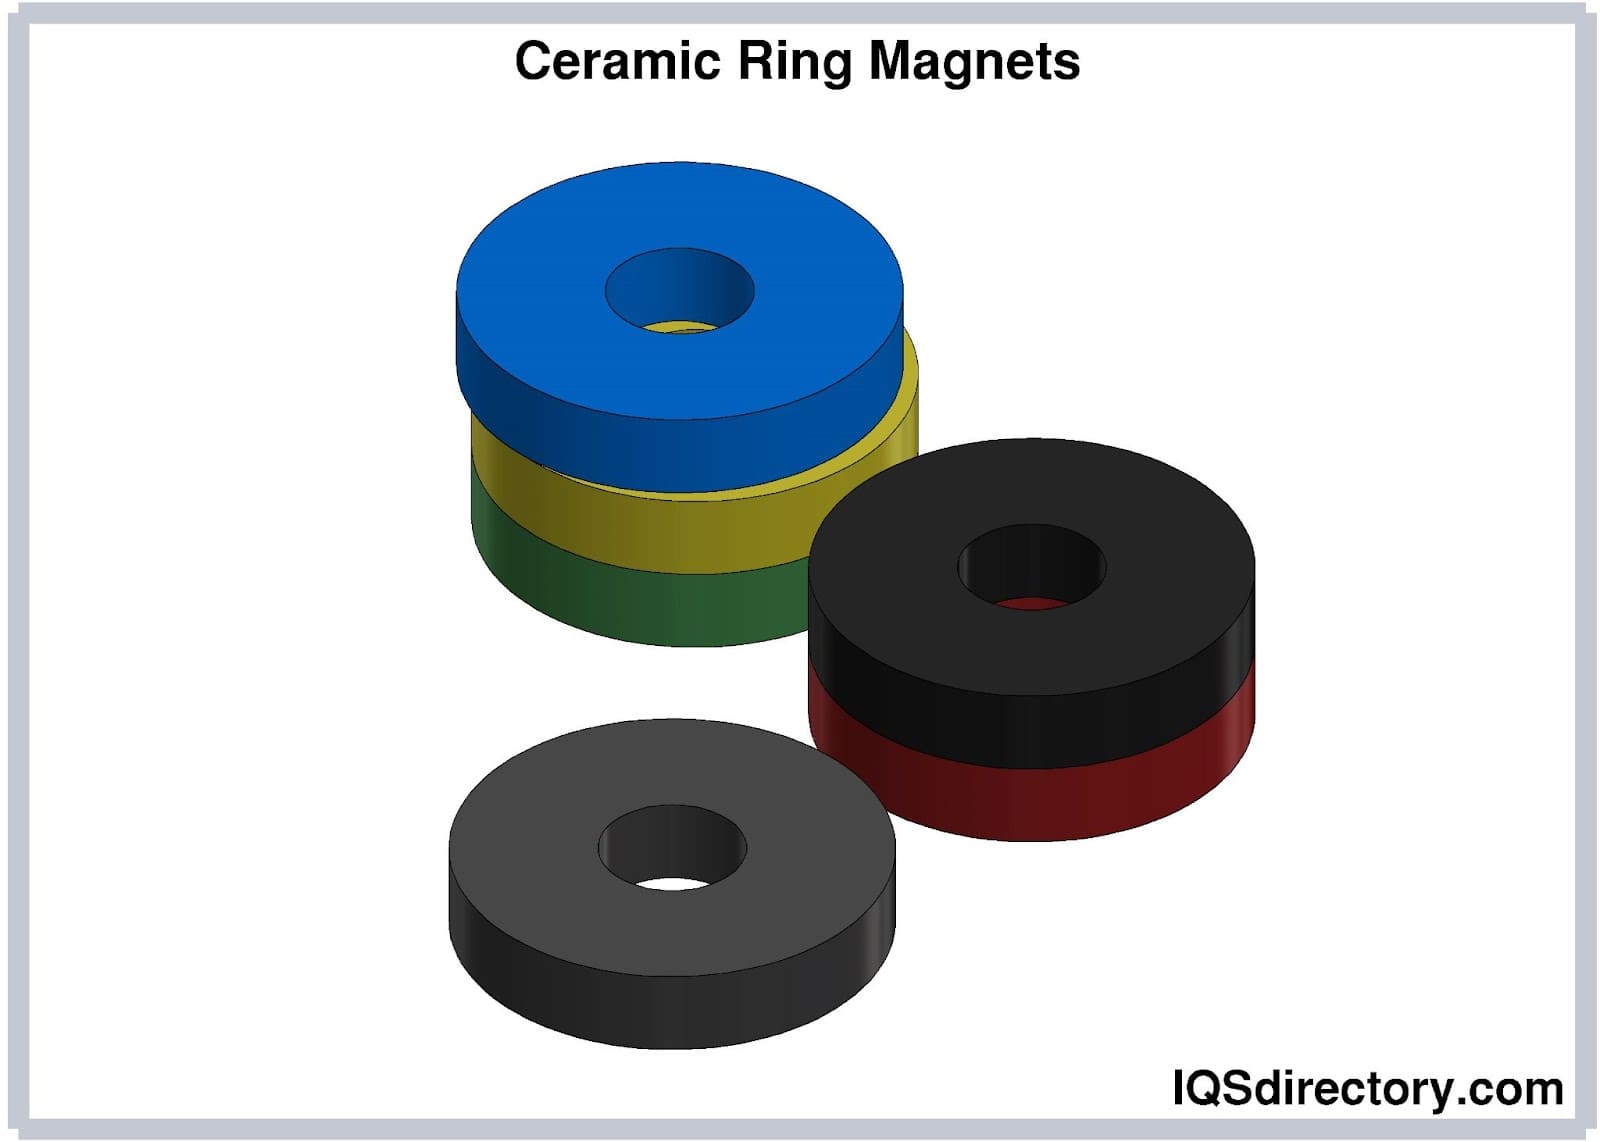 Flexible Magnets Manufacturers and Suppliers in the USA